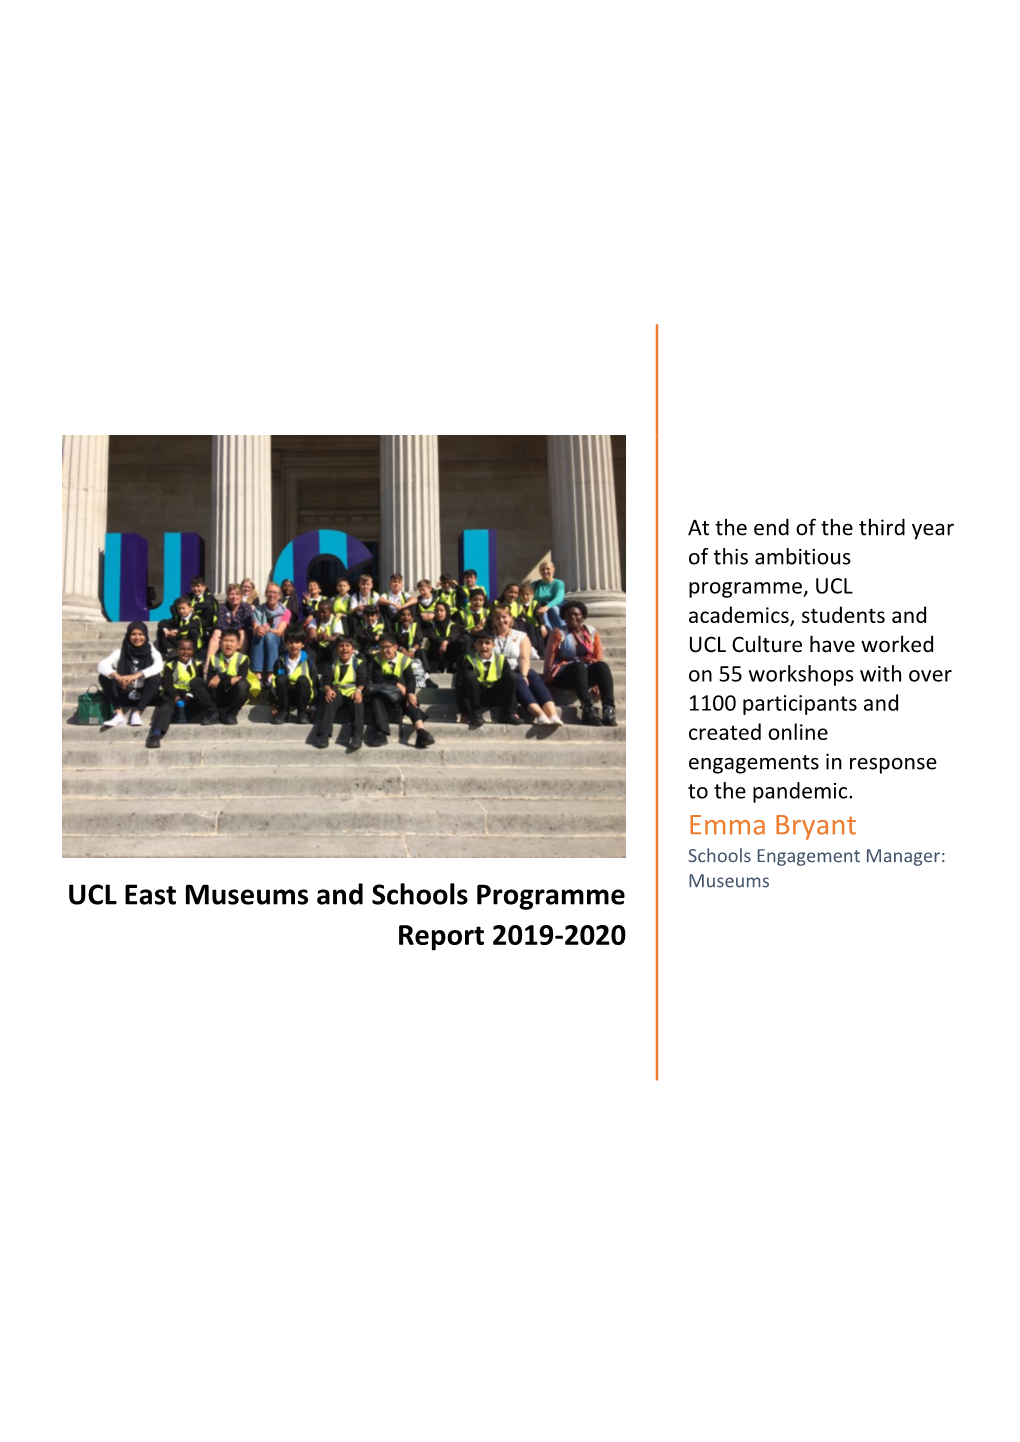 UCL East Museums and Schools Programme Museums Report 2019-2020